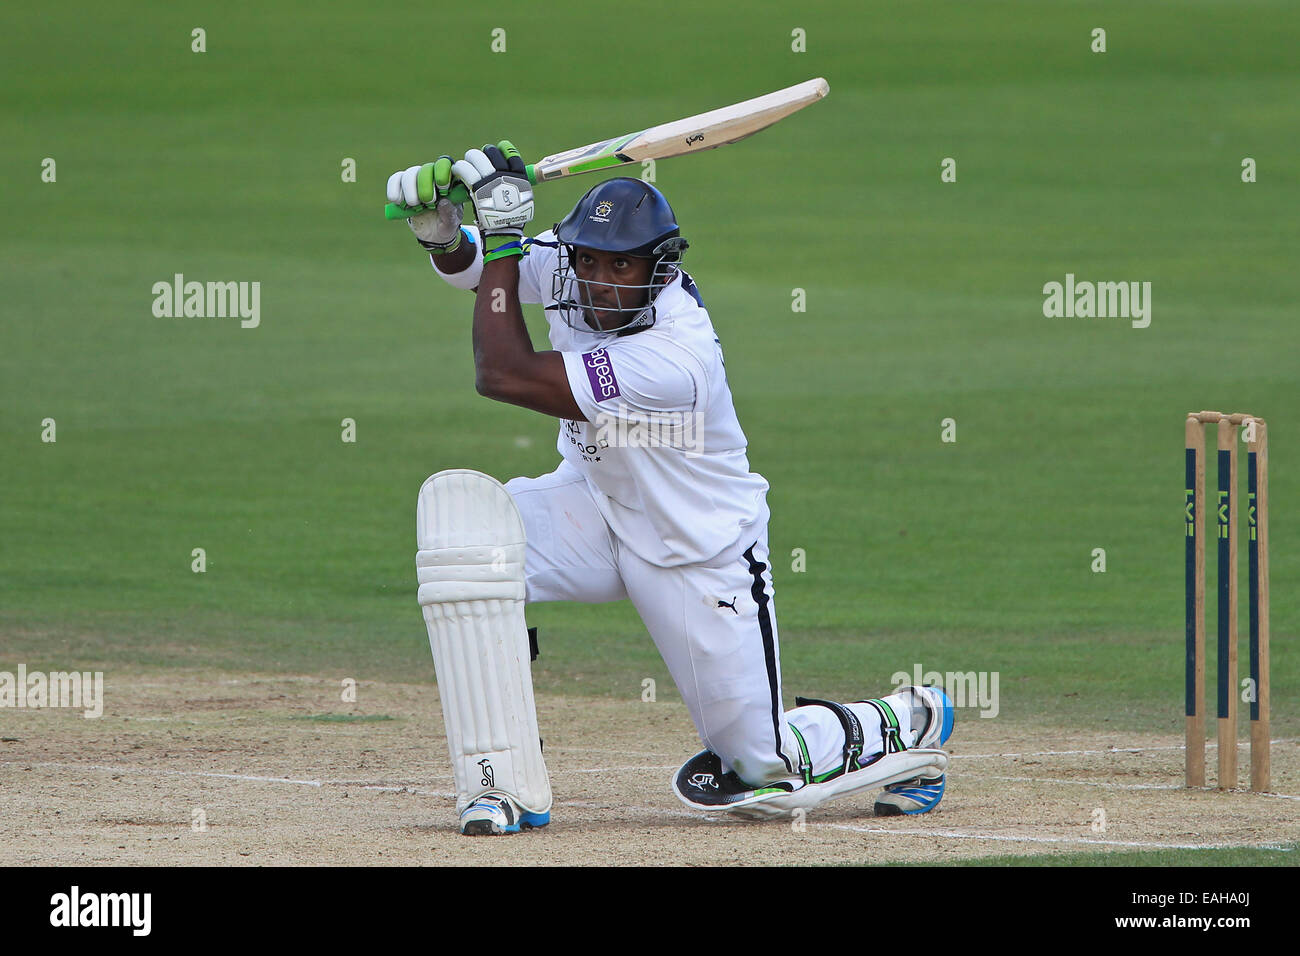 Cricket - Michael Carberry of Hampshire bats in the LV County Championship Stock Photo